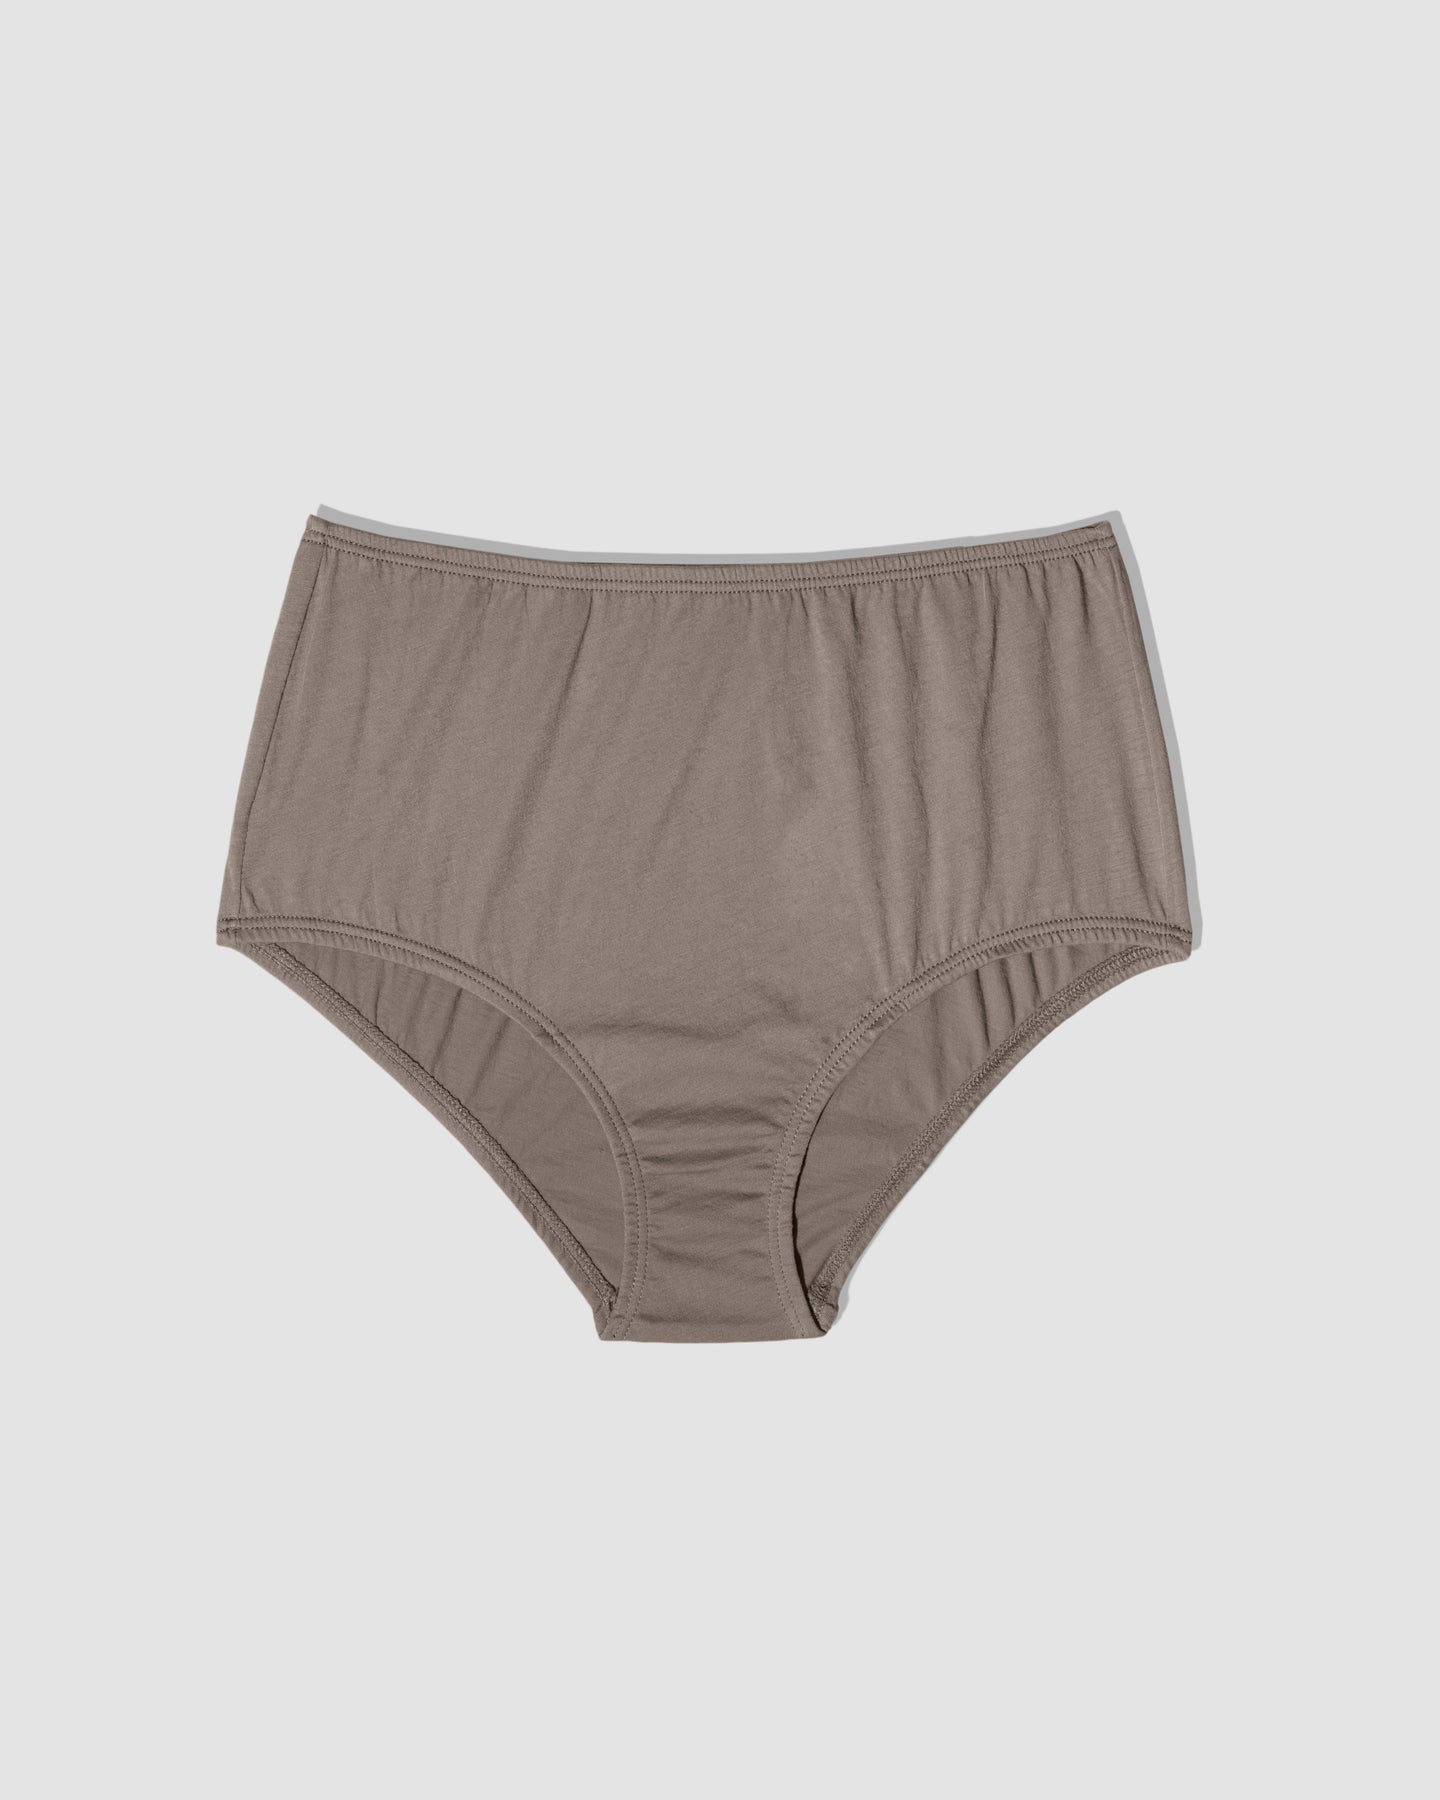 Wholesale organic period panties In Sexy And Comfortable Styles 